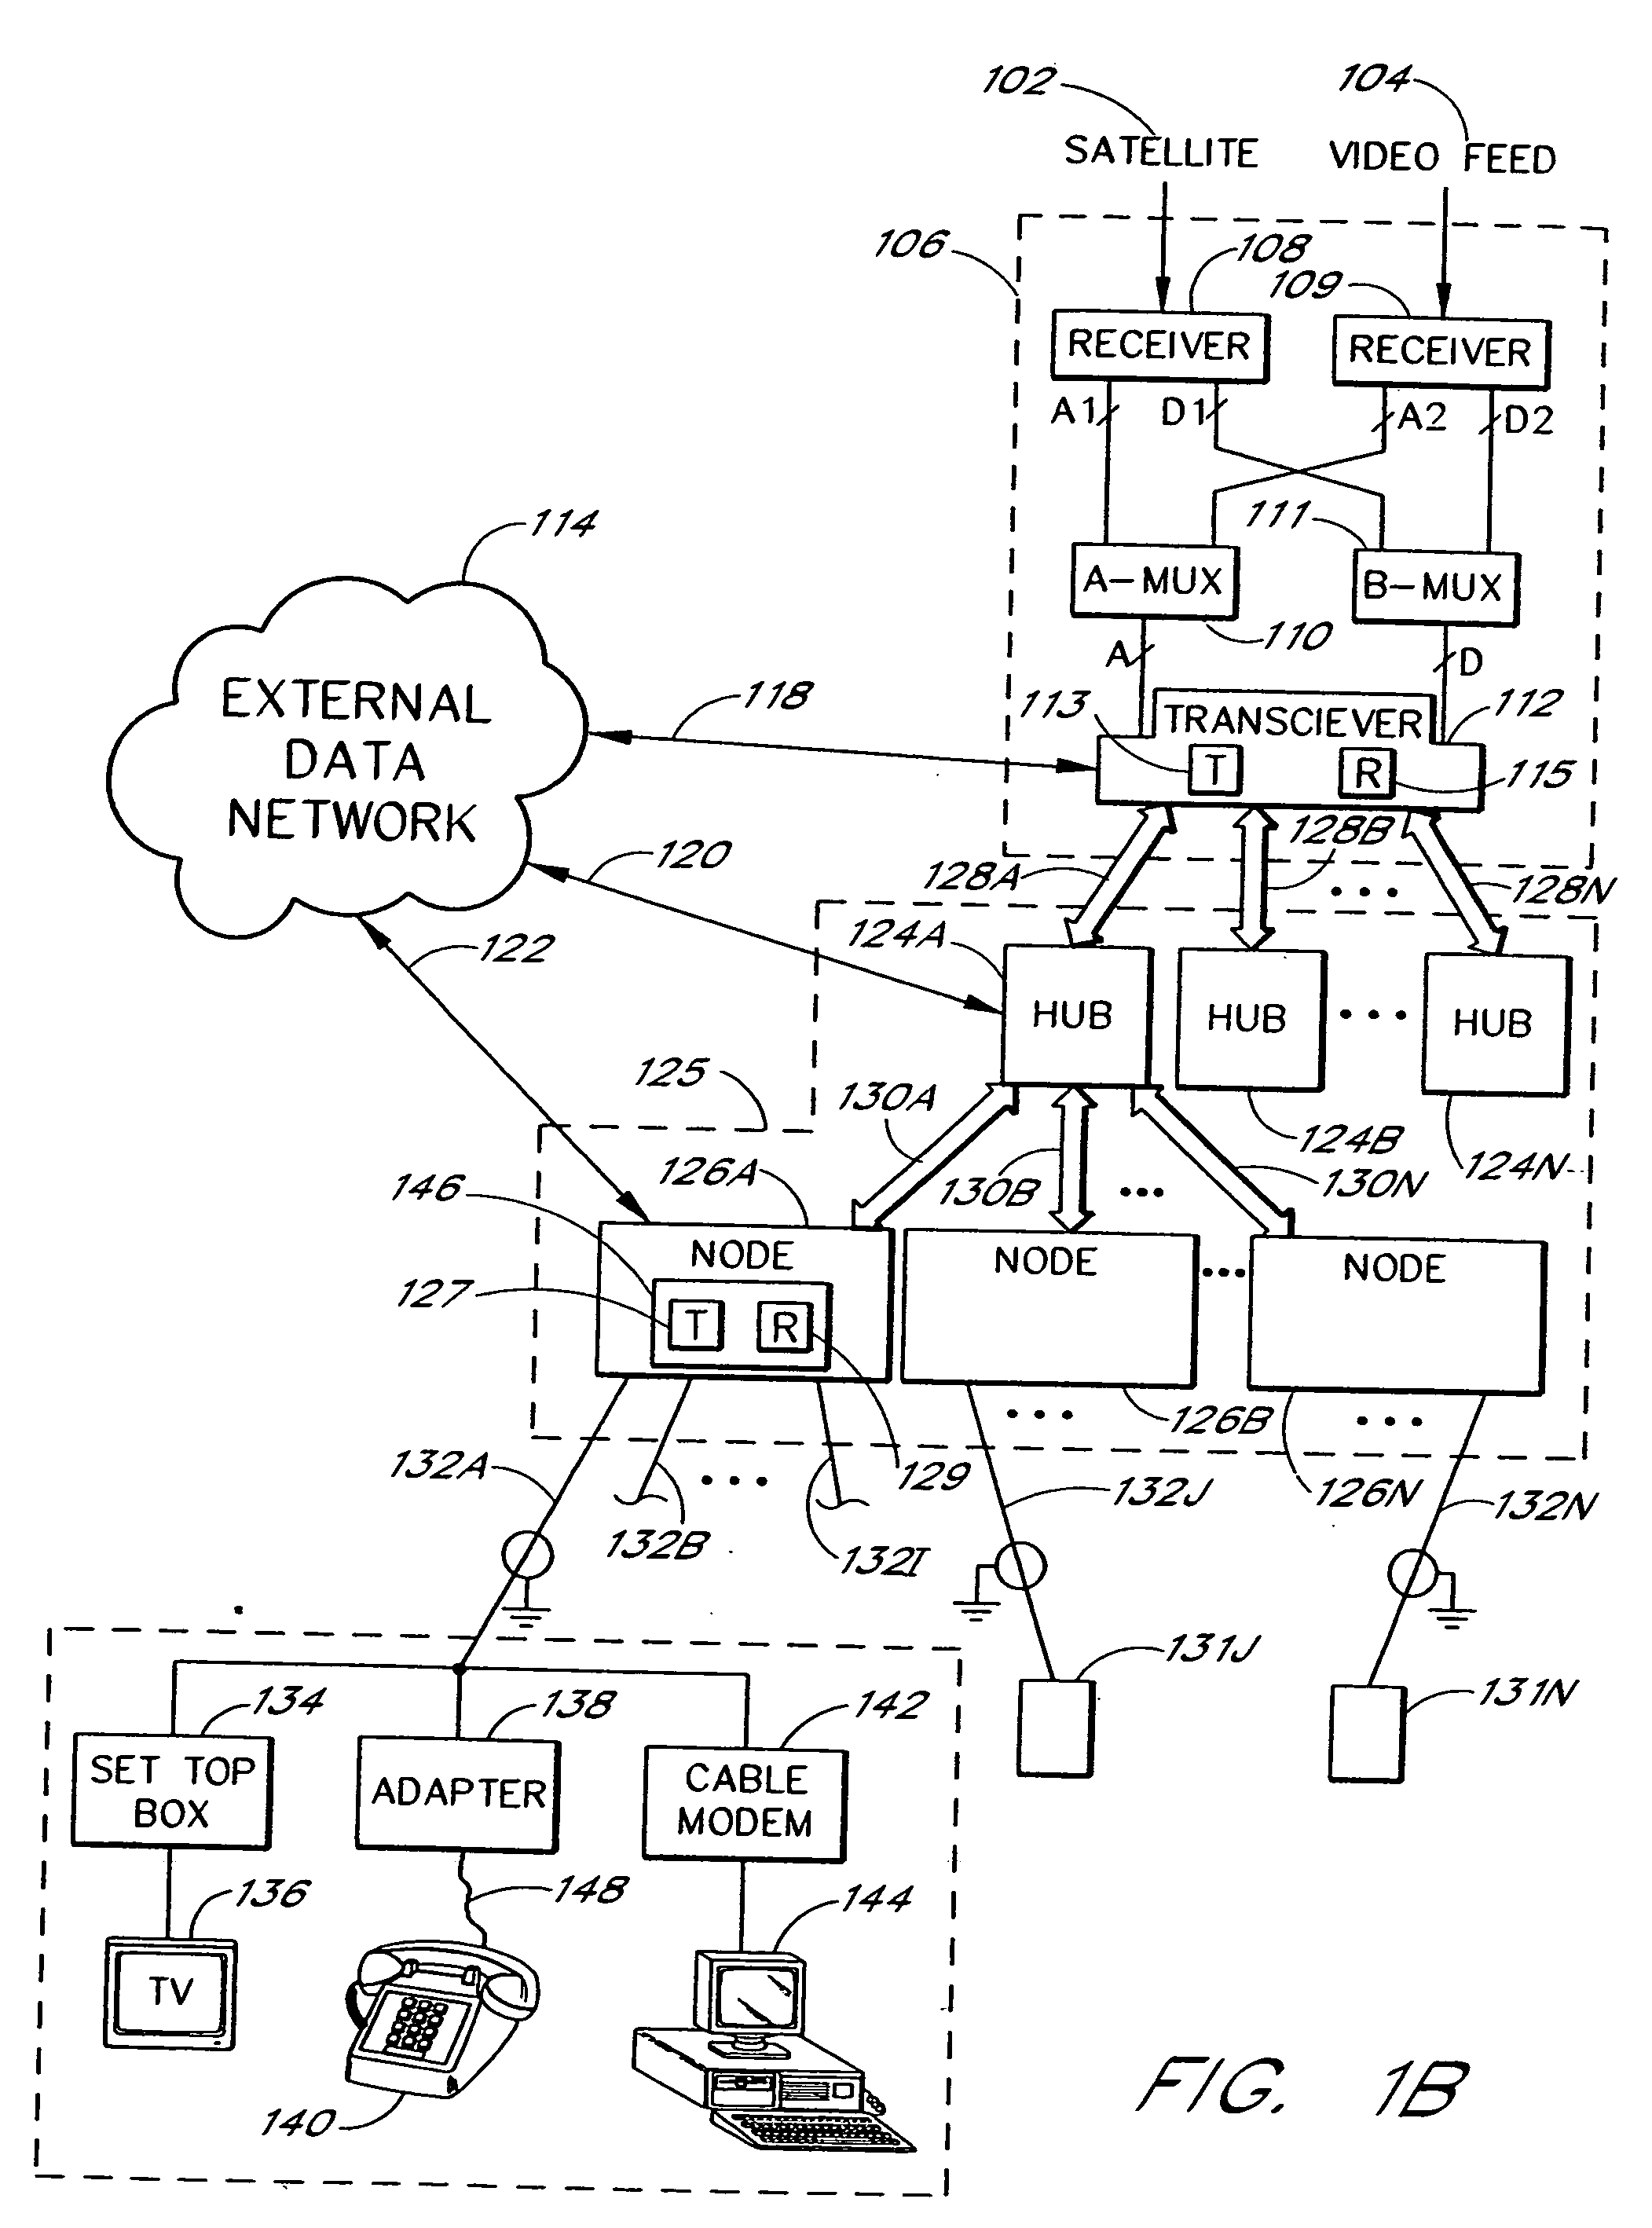 Method and apparatus for a digitized CATV network for bundled services